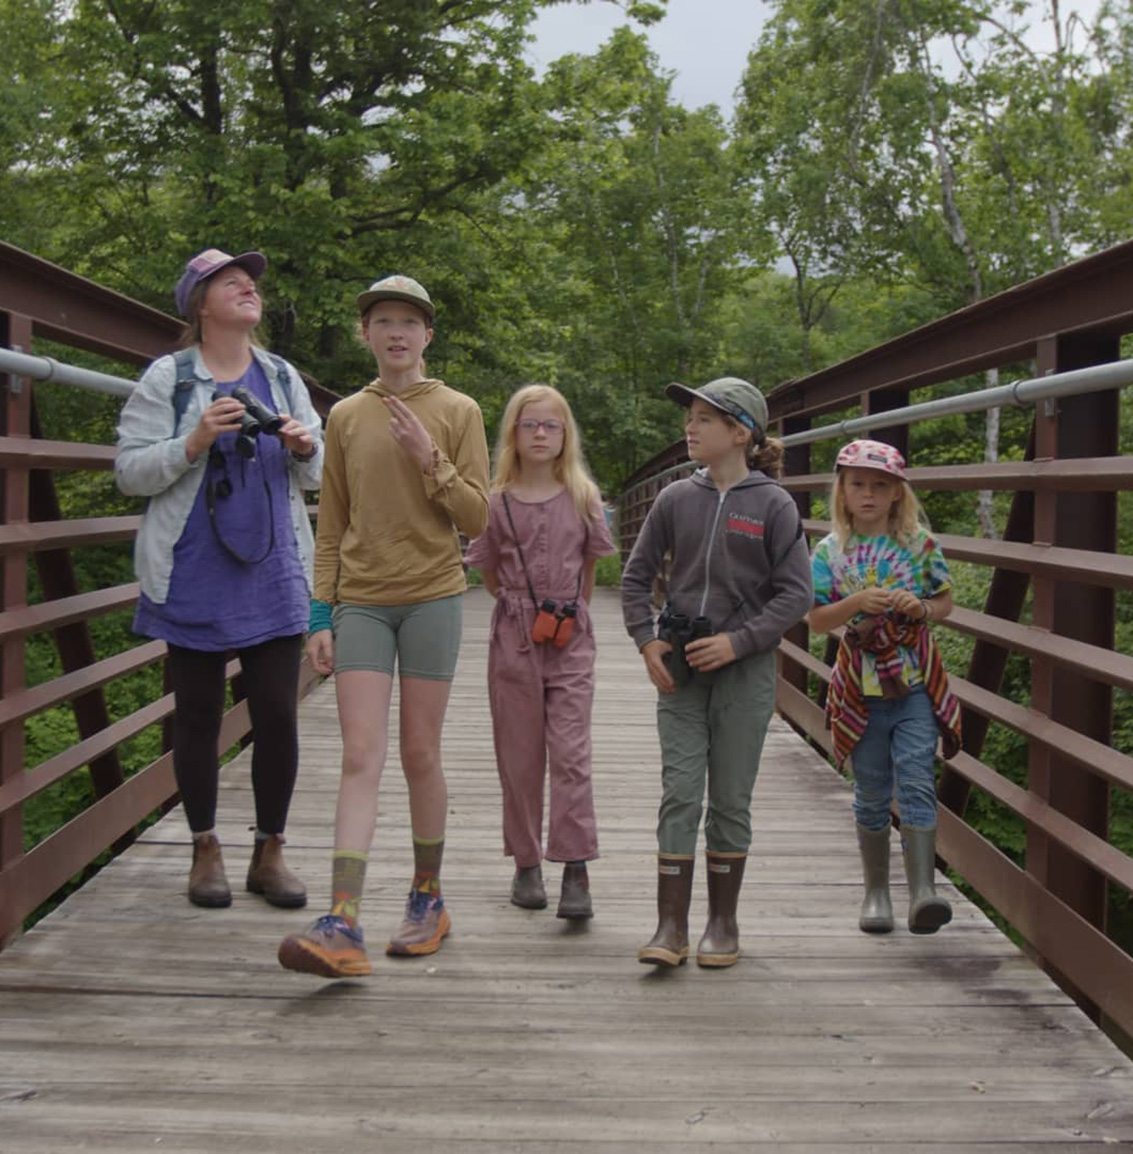 A group of five kids (of different ages) walk over a wooden bridge.